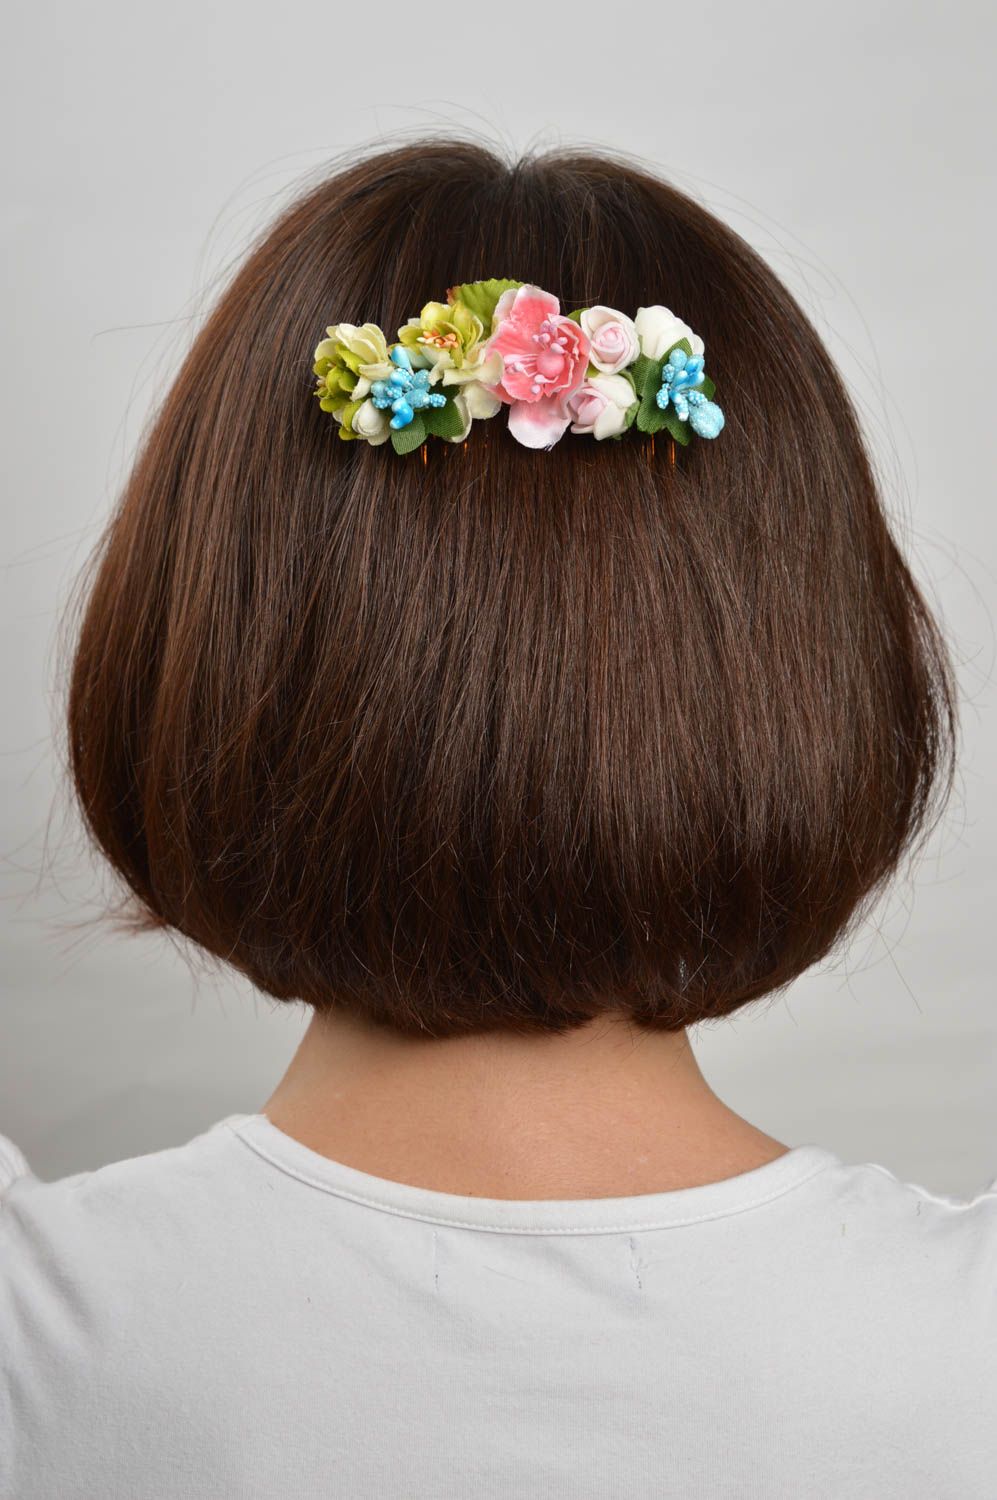 Handmade hair accessories floral hair comb hair decorations gifts for girls photo 1